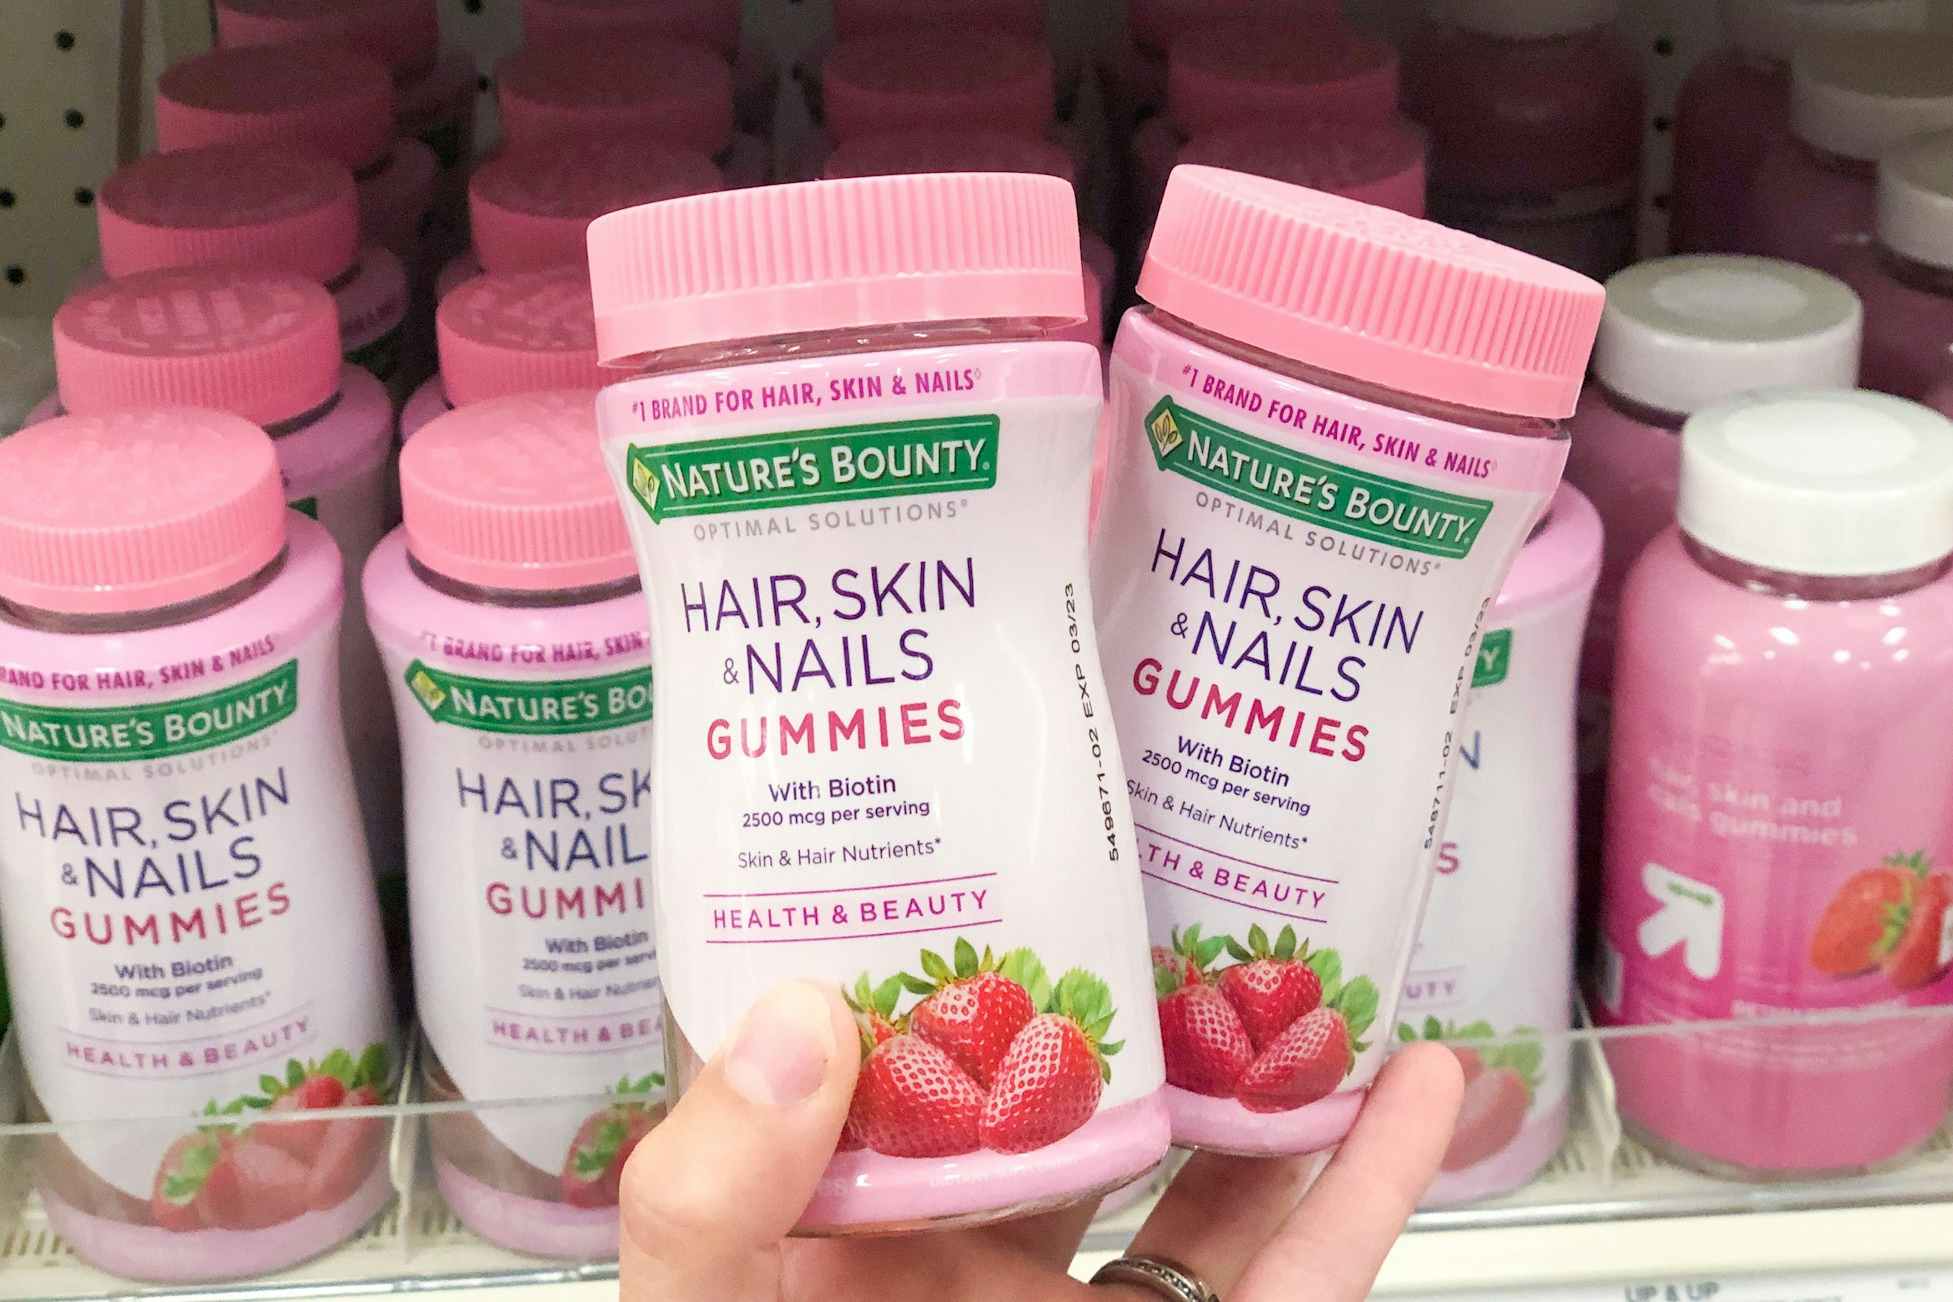 Nature's Bounty Hair, Skin & Nails Vitamins, Only $1.76 on Amazon